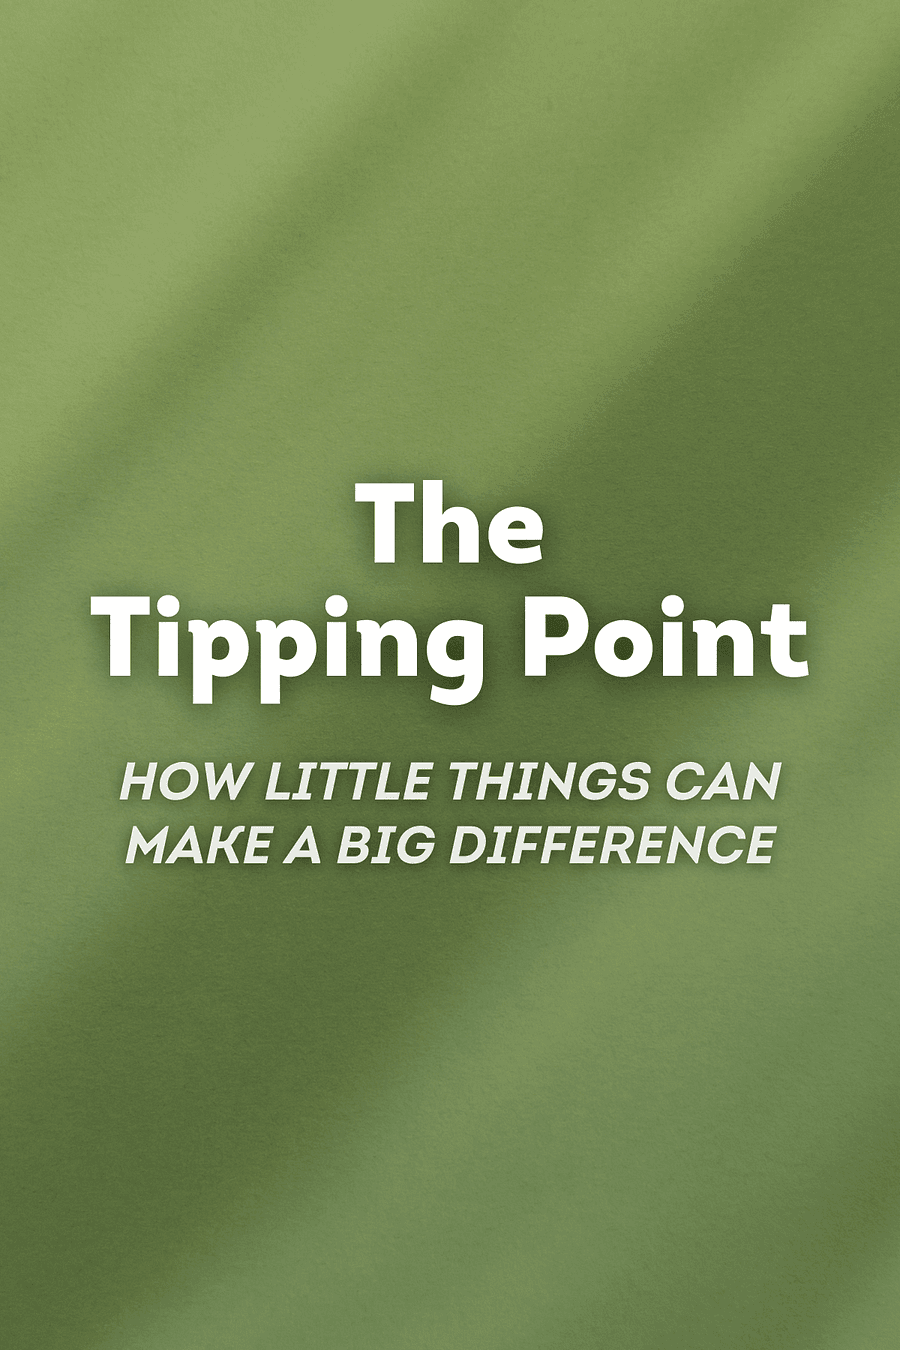 The Tipping Point by Malcolm Gladwell - Book Summary